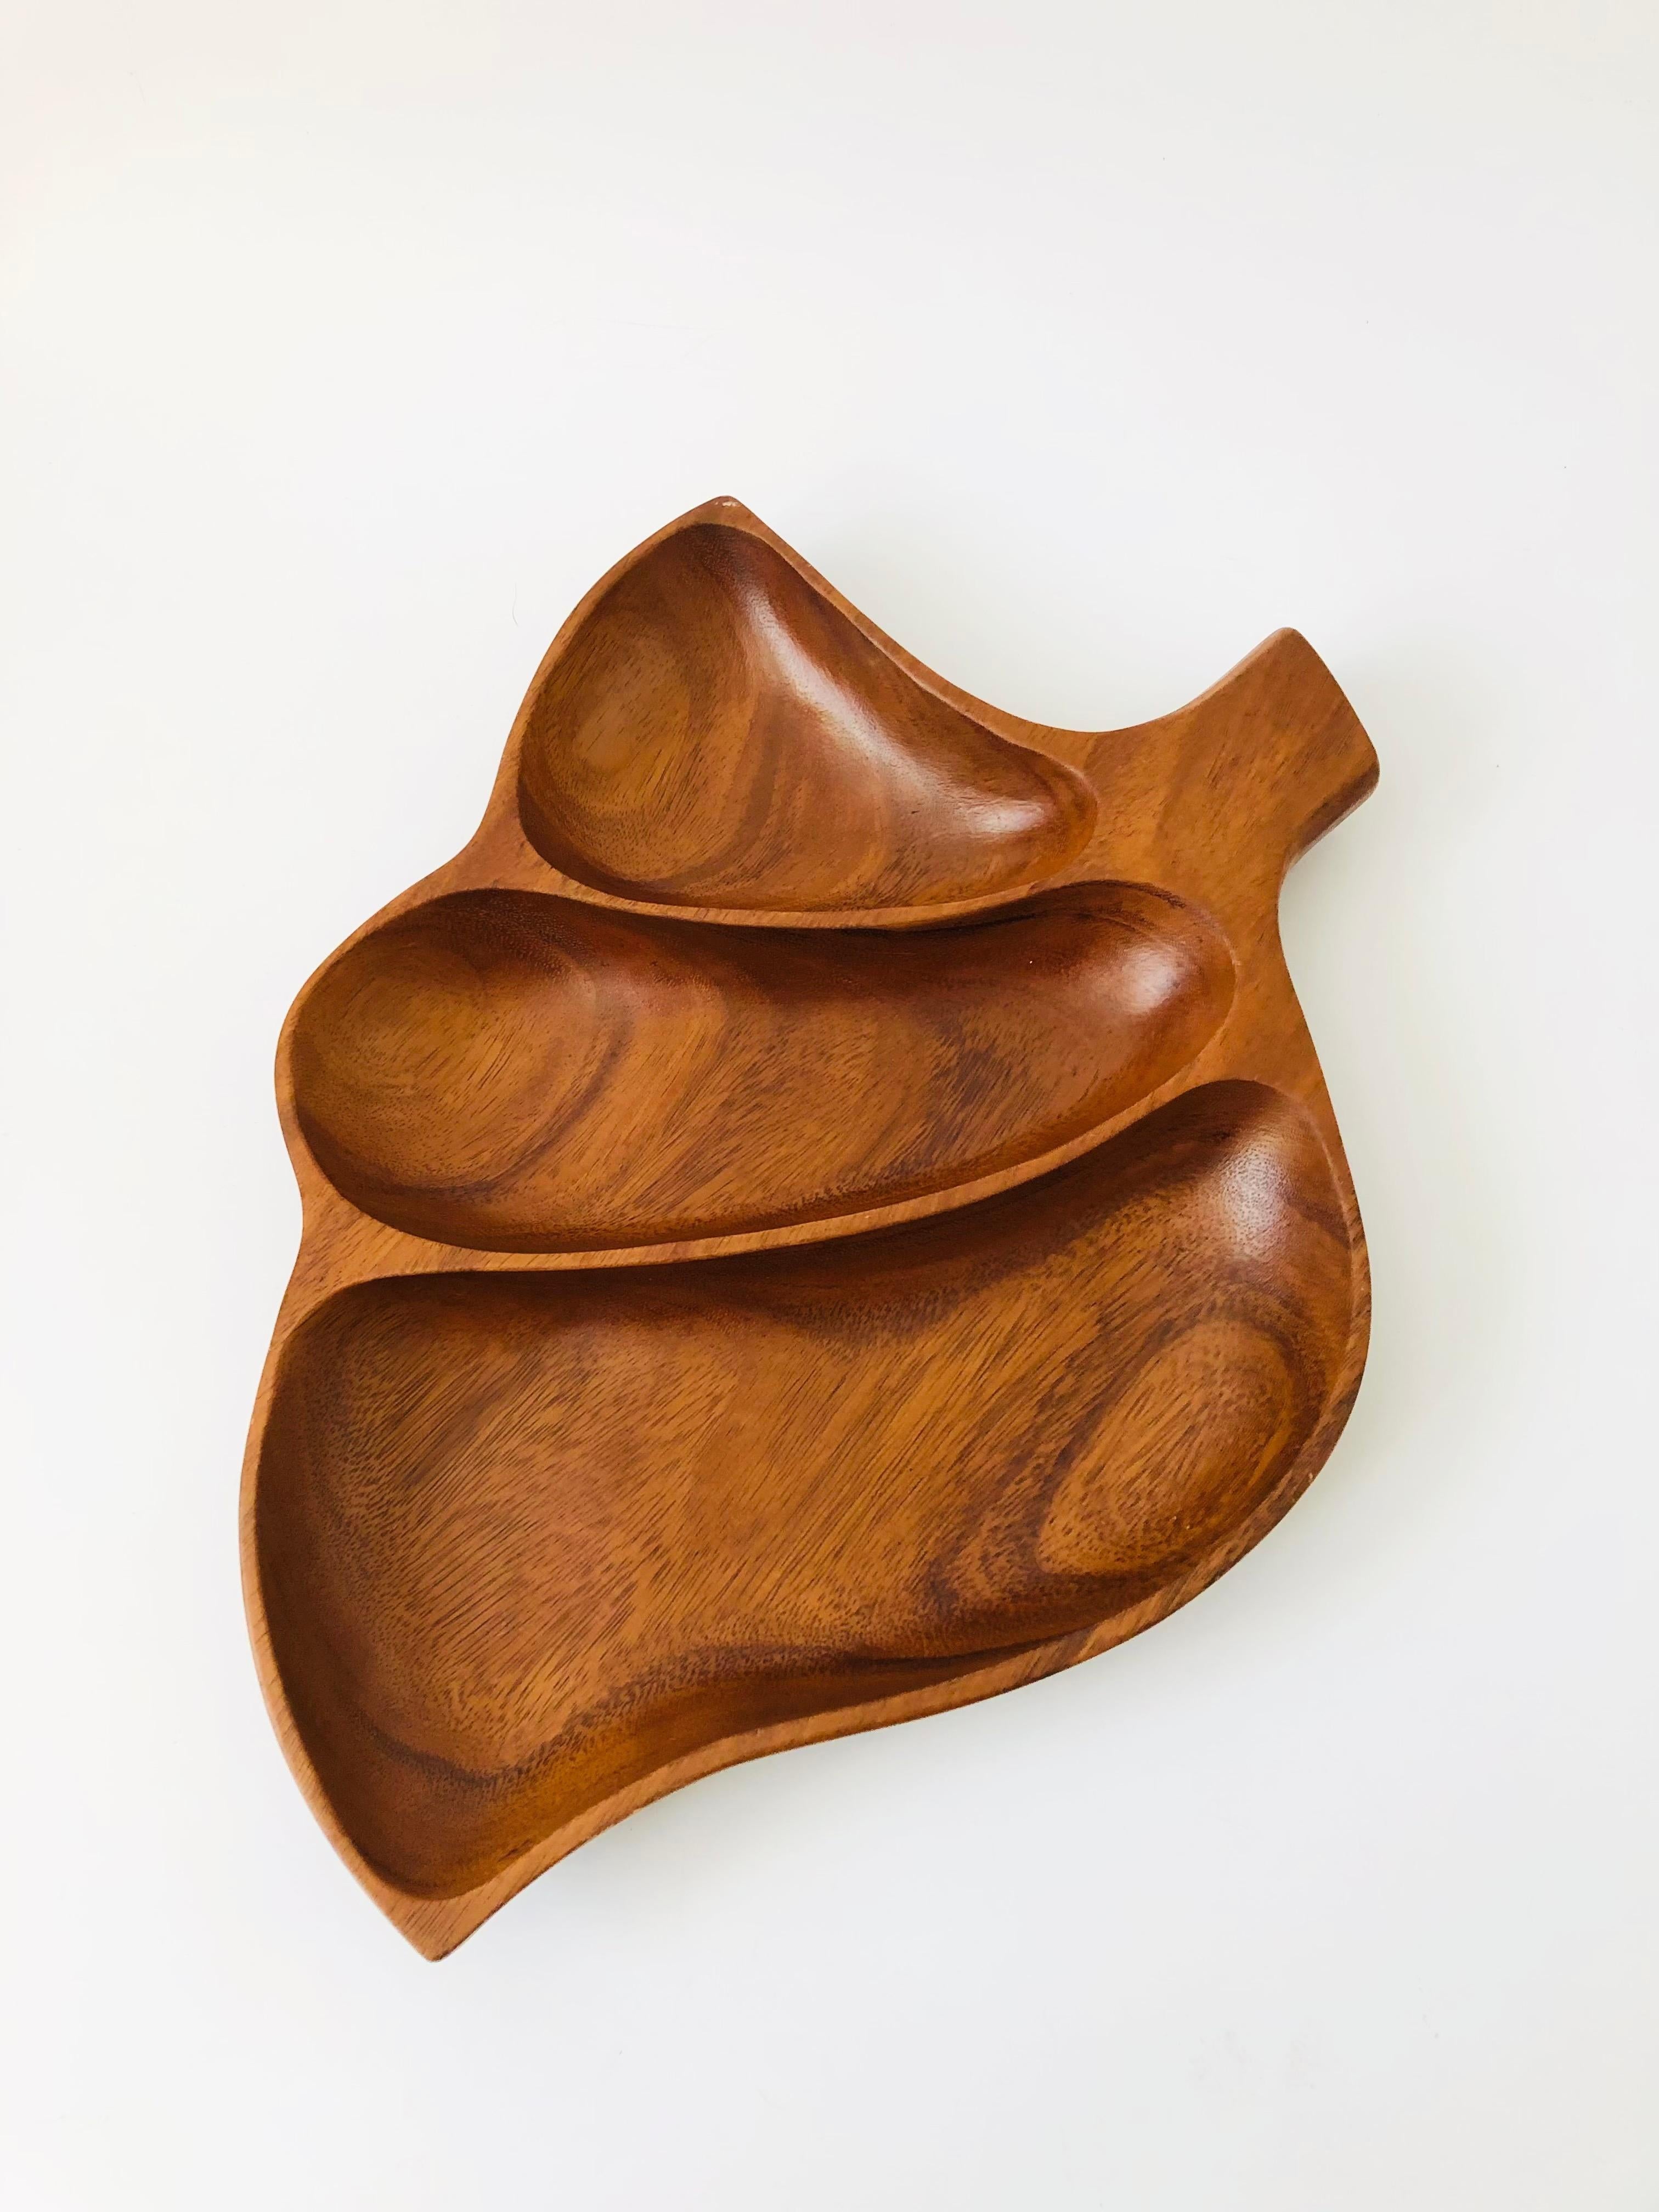 A vintage wood leaf shaped tray with 3 divided compartments for organizing or serving. Nice curved shape to the leaf.